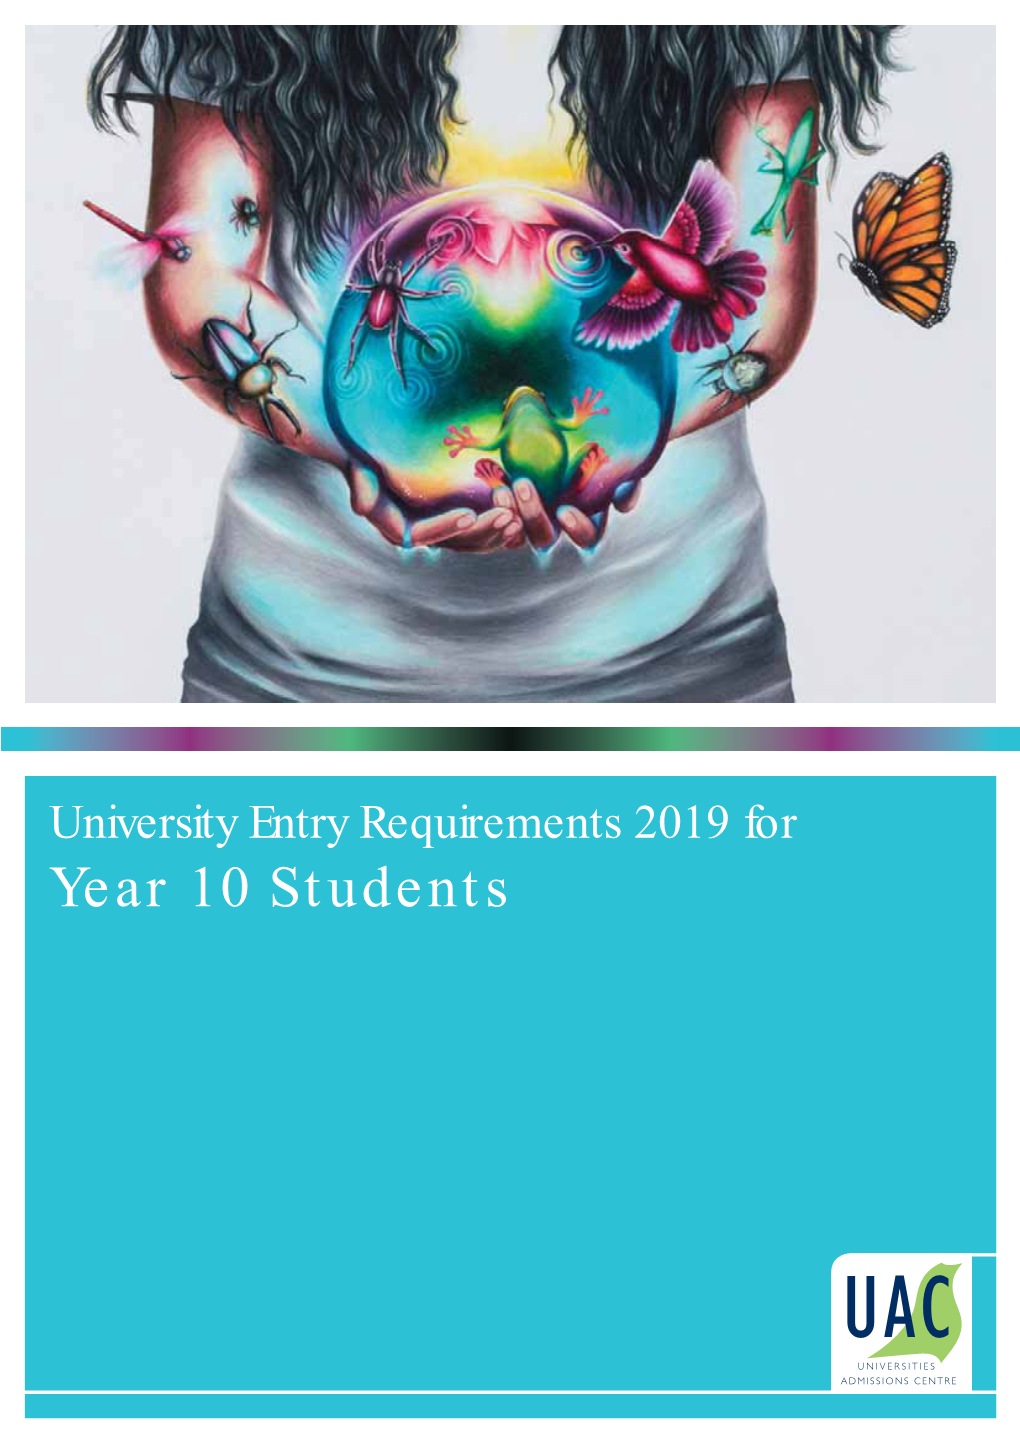 University Entry Requirements 2019 for Year 10 Students Essentials: University Entry Requirements 2019 for Year 10 Students